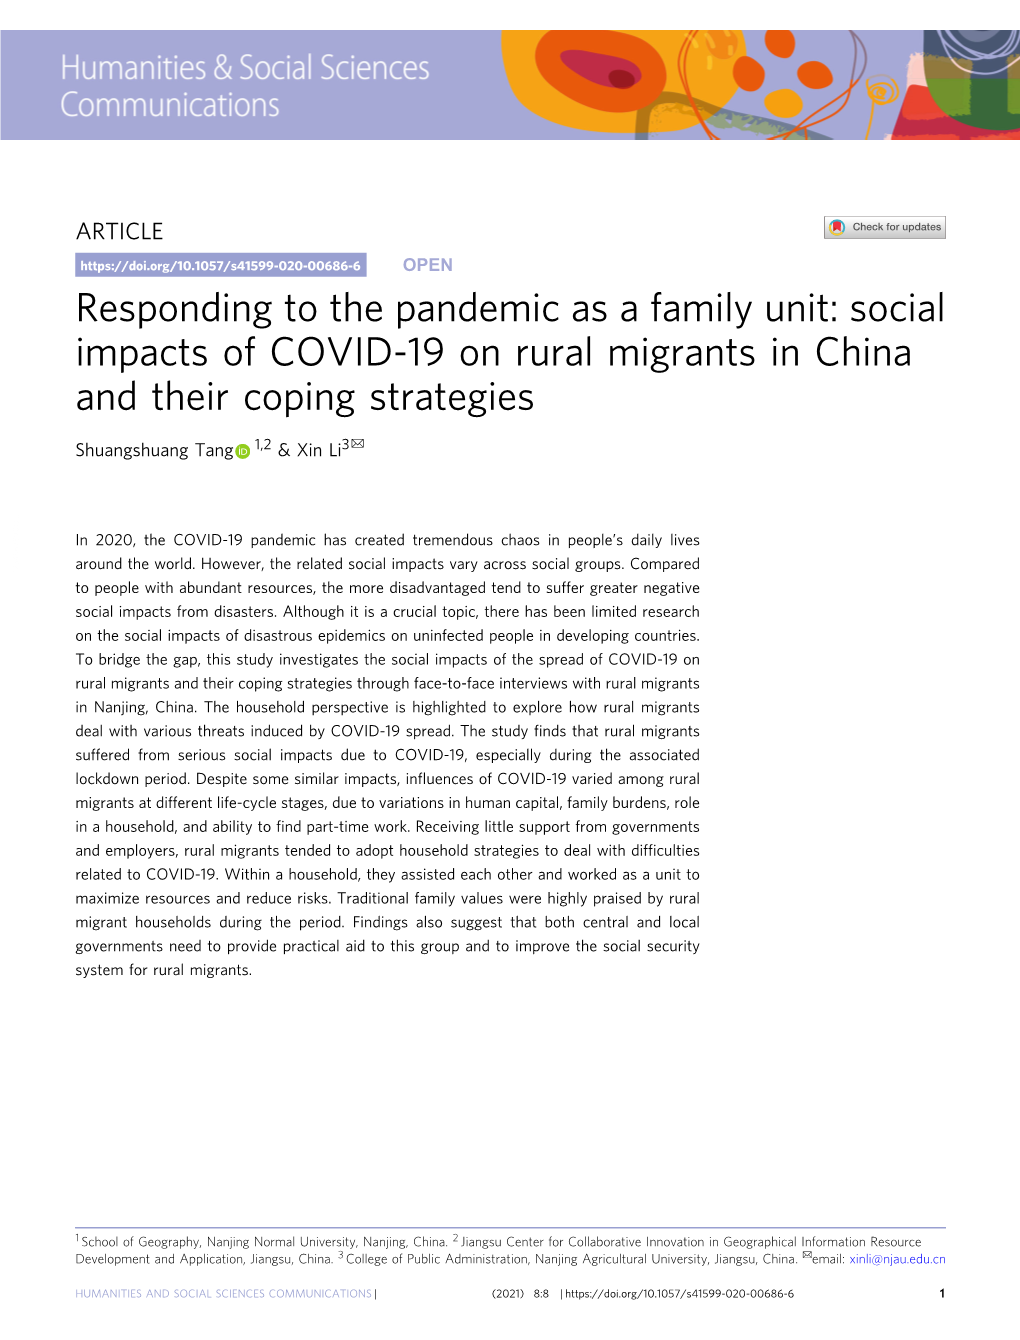 Social Impacts of COVID-19 on Rural Migrants in China and Their Coping Strategies ✉ Shuangshuang Tang 1,2 & Xin Li3